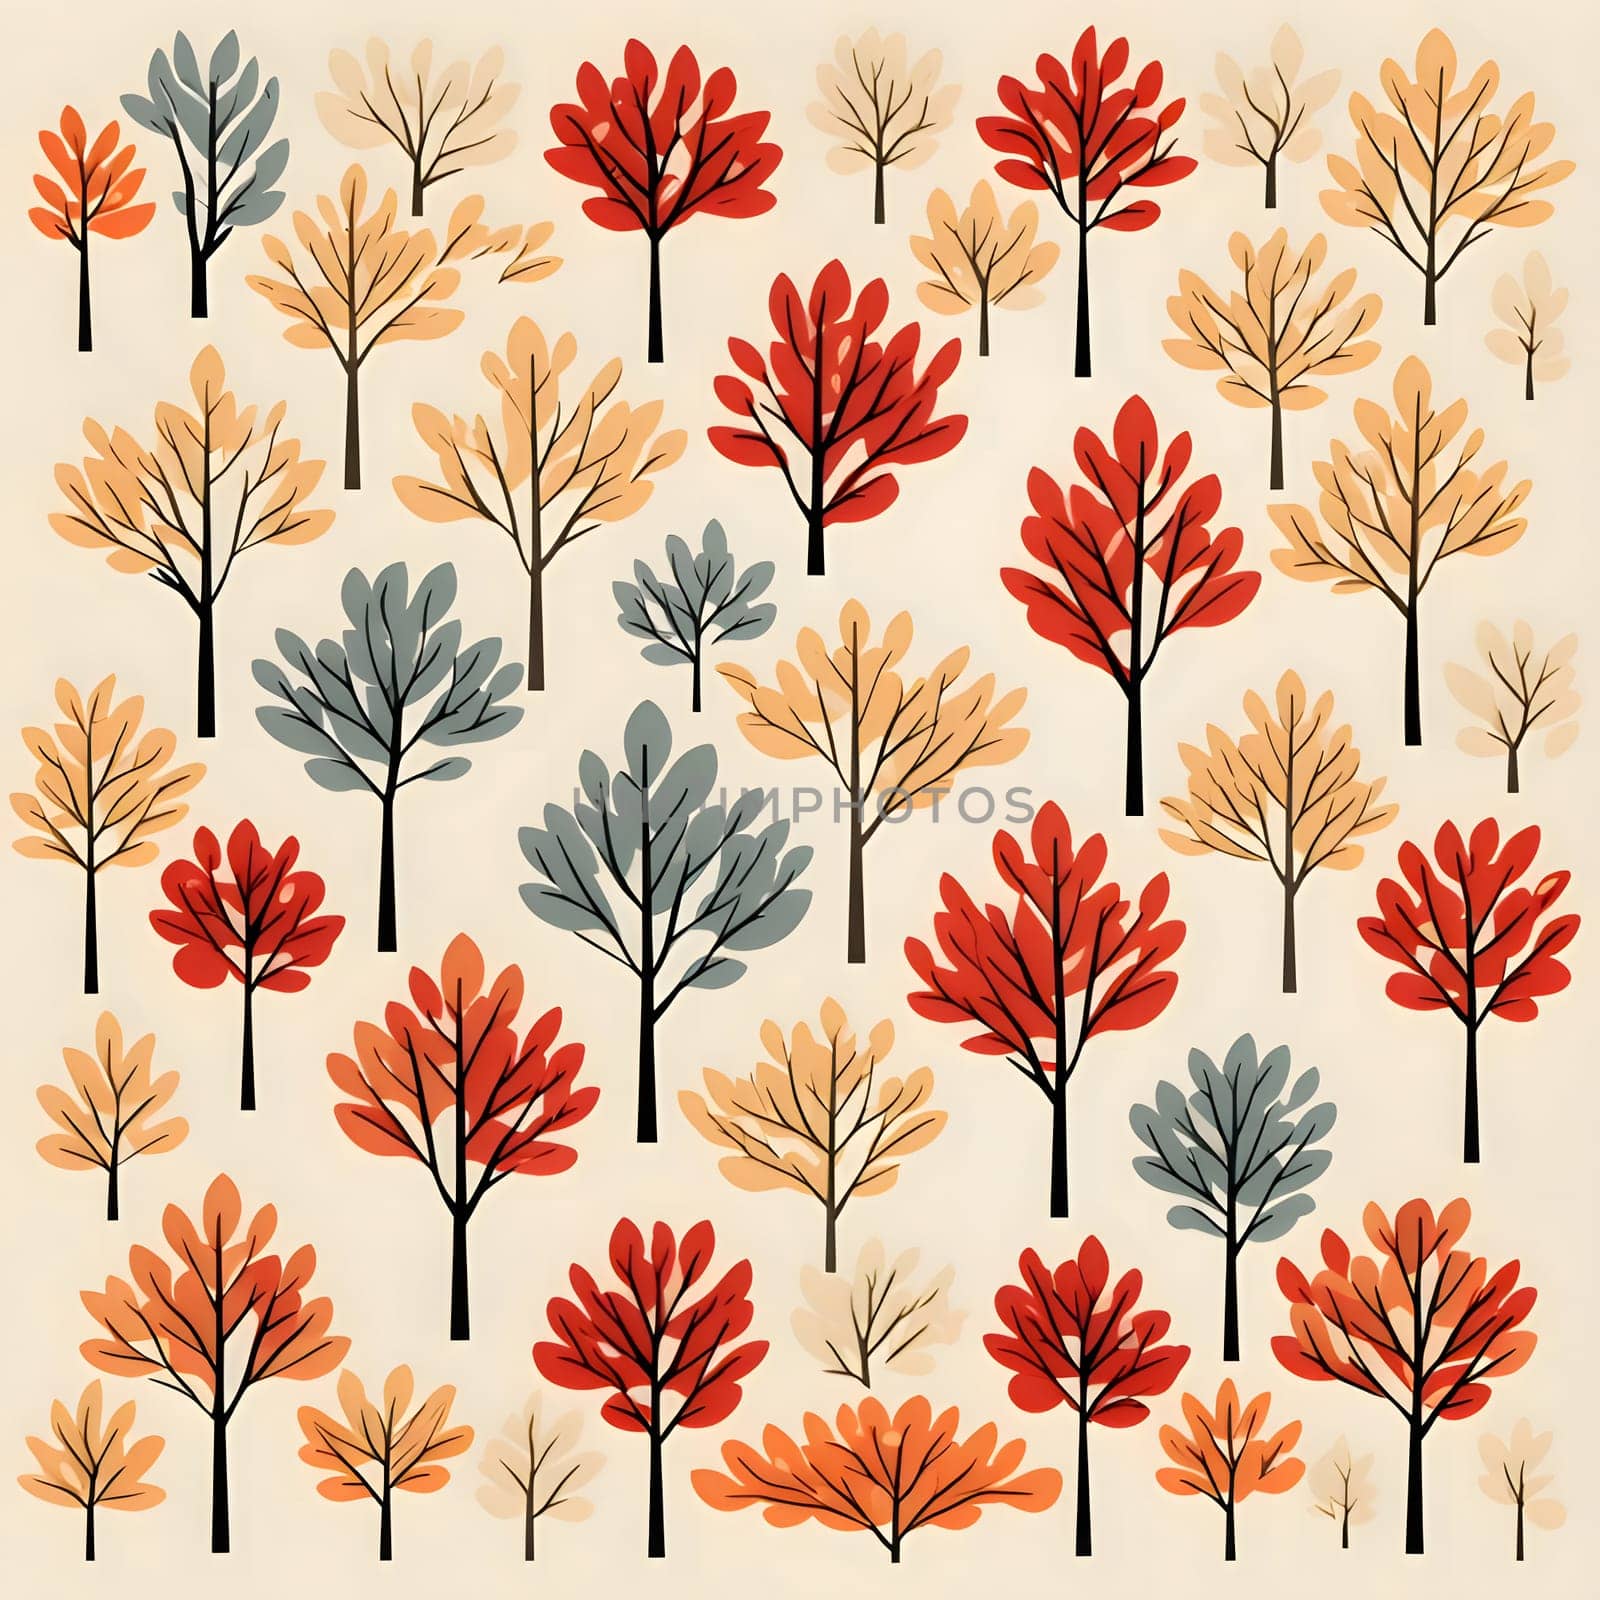 Patterns and banners backgrounds: Autumn background with colorful trees. Seamless vector pattern.